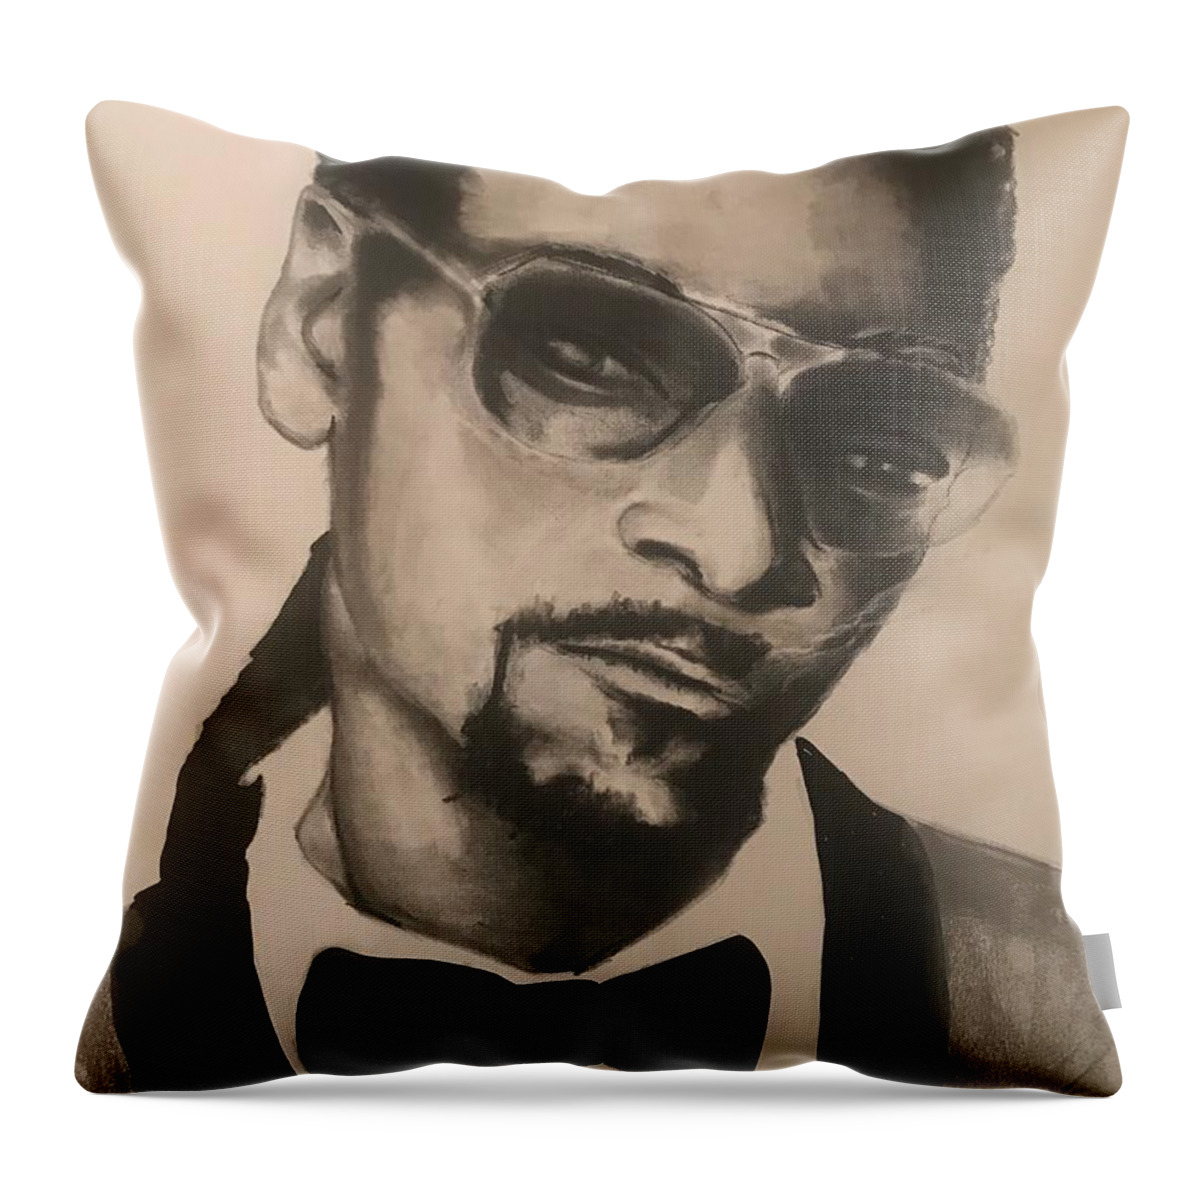  Throw Pillow featuring the drawing Cool by Angie ONeal